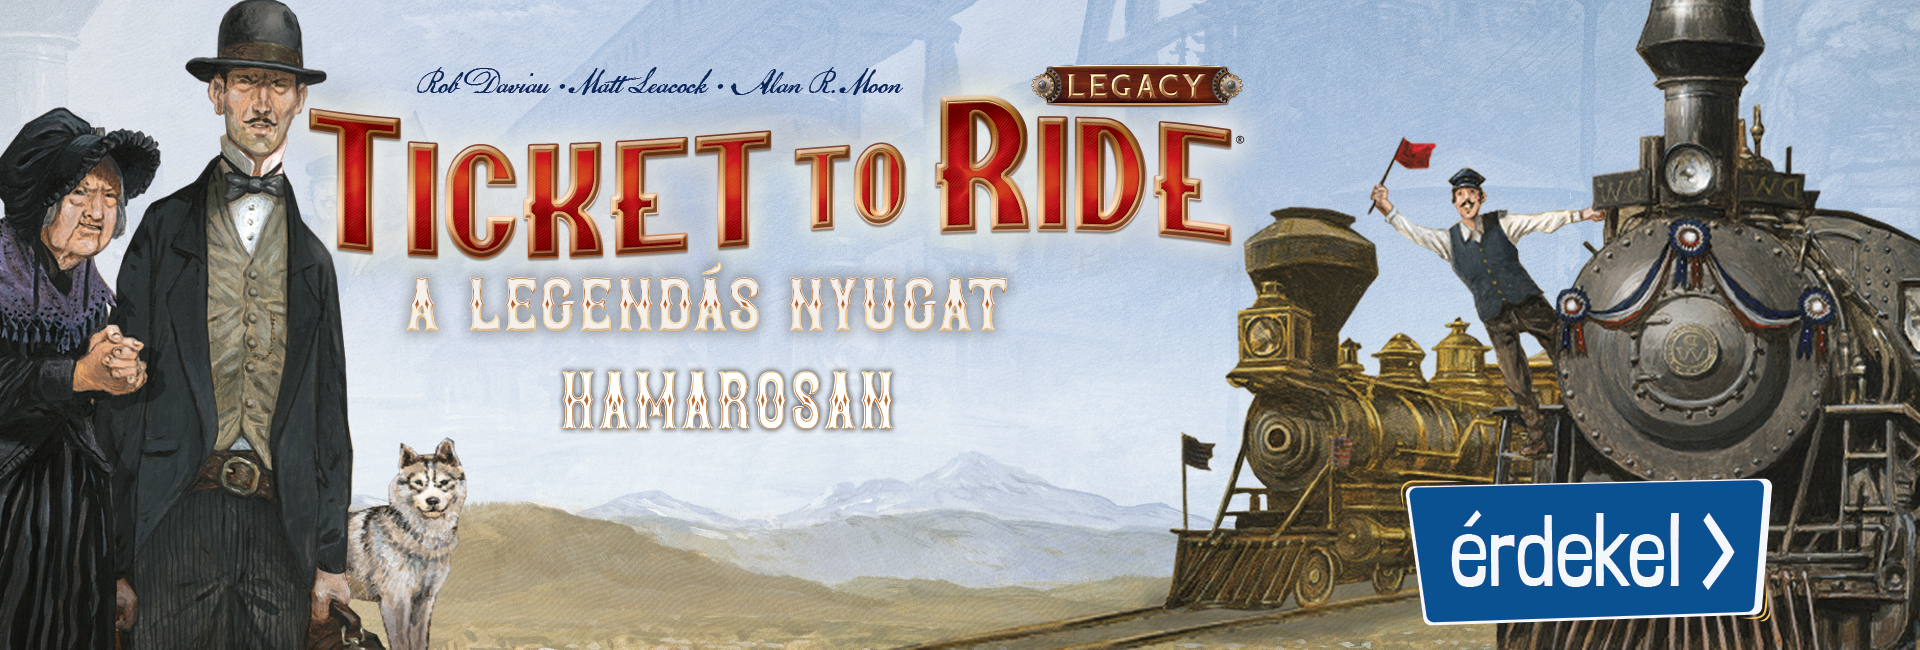 Ticket to Ride: Legacy